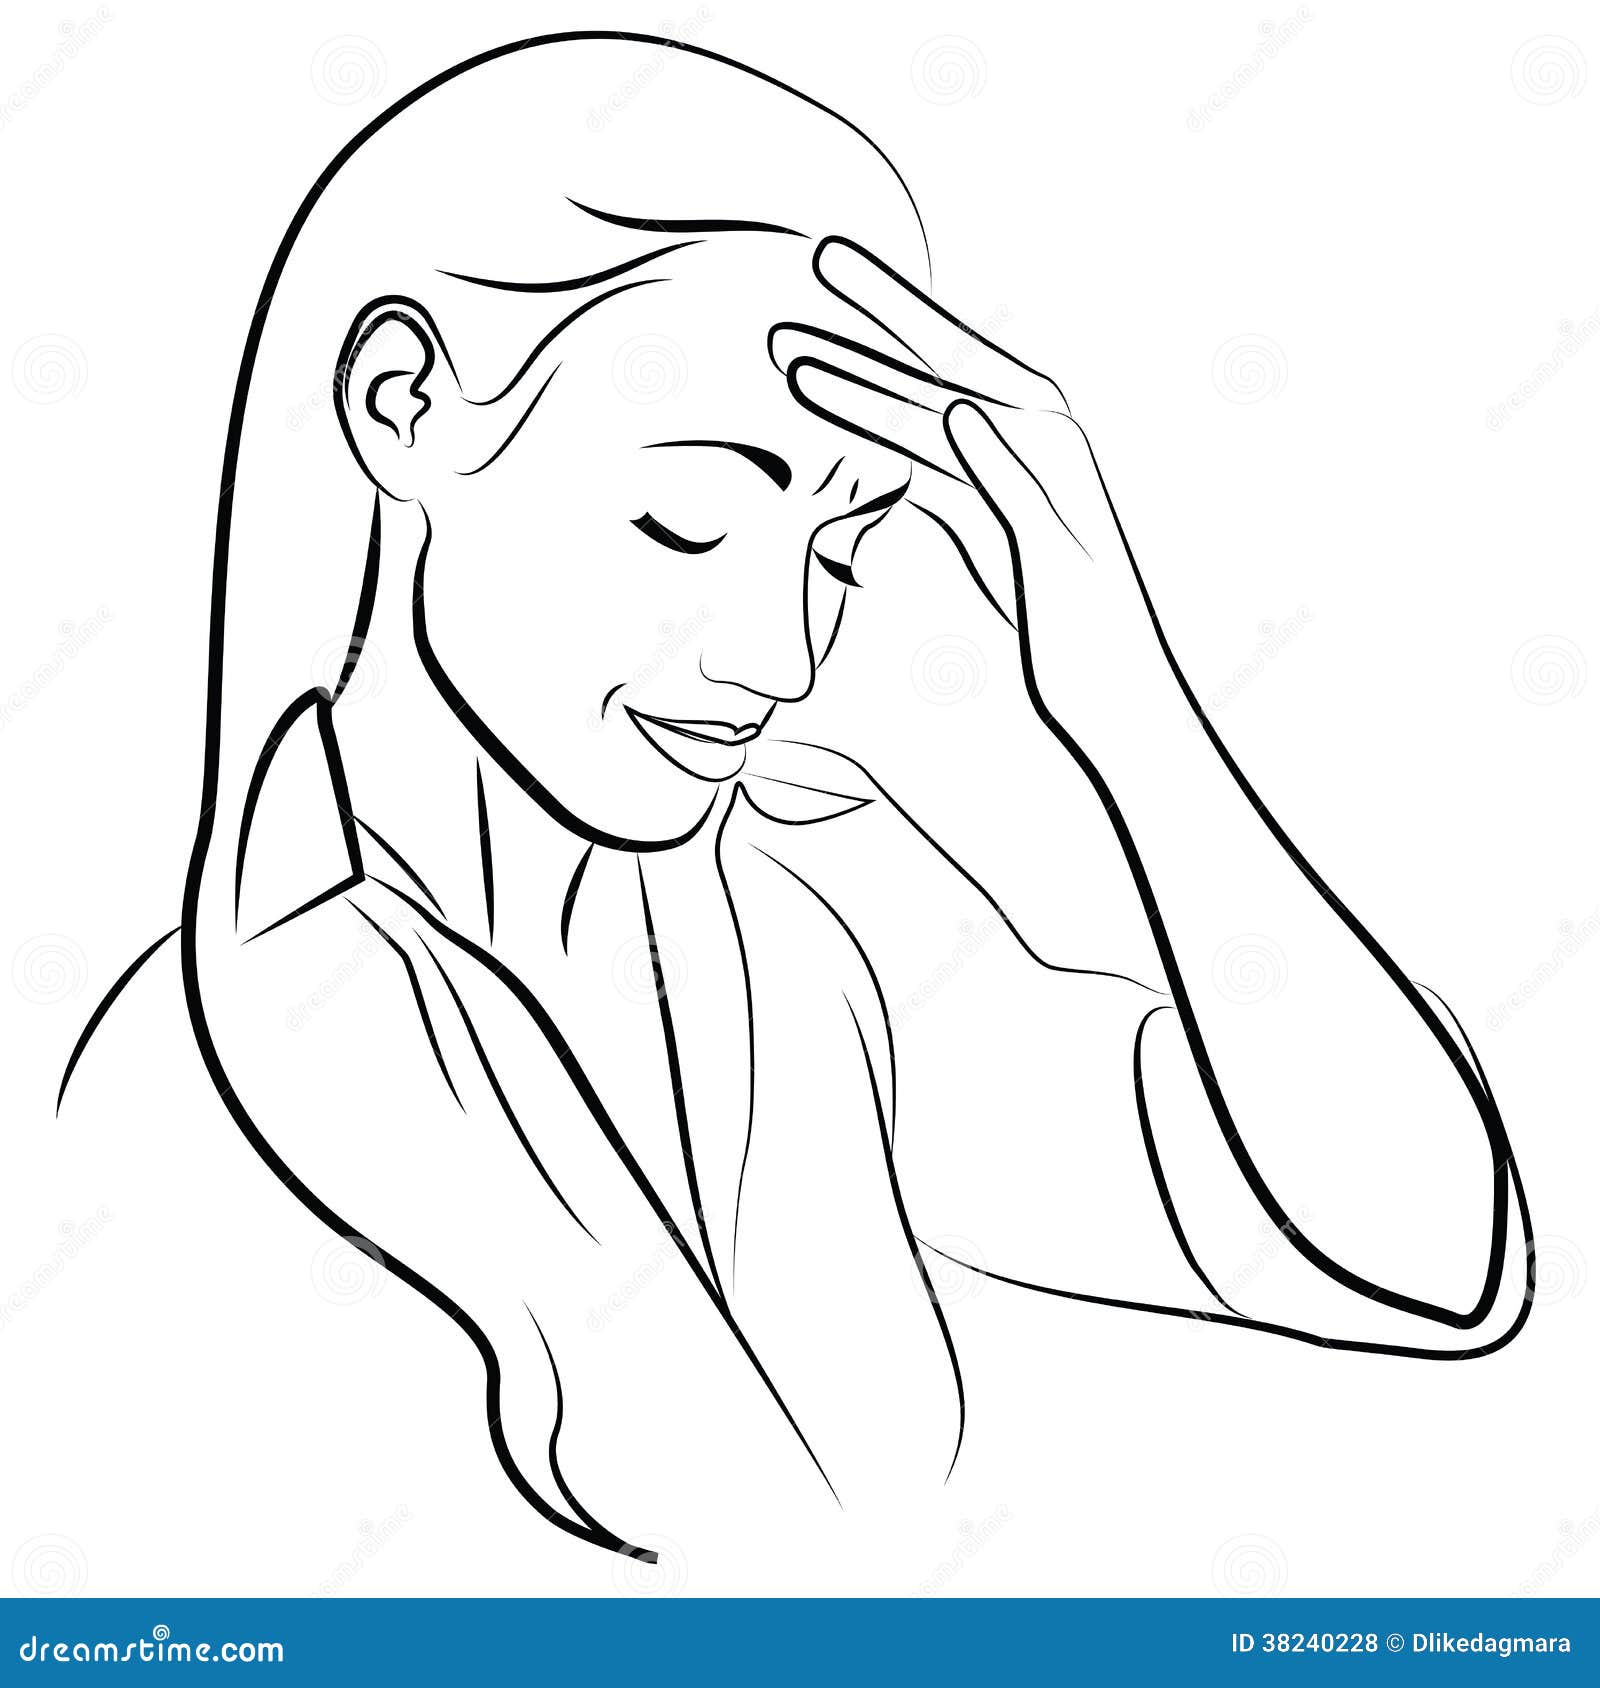 Woman With Headache Royalty Free Stock Photos - Image ...